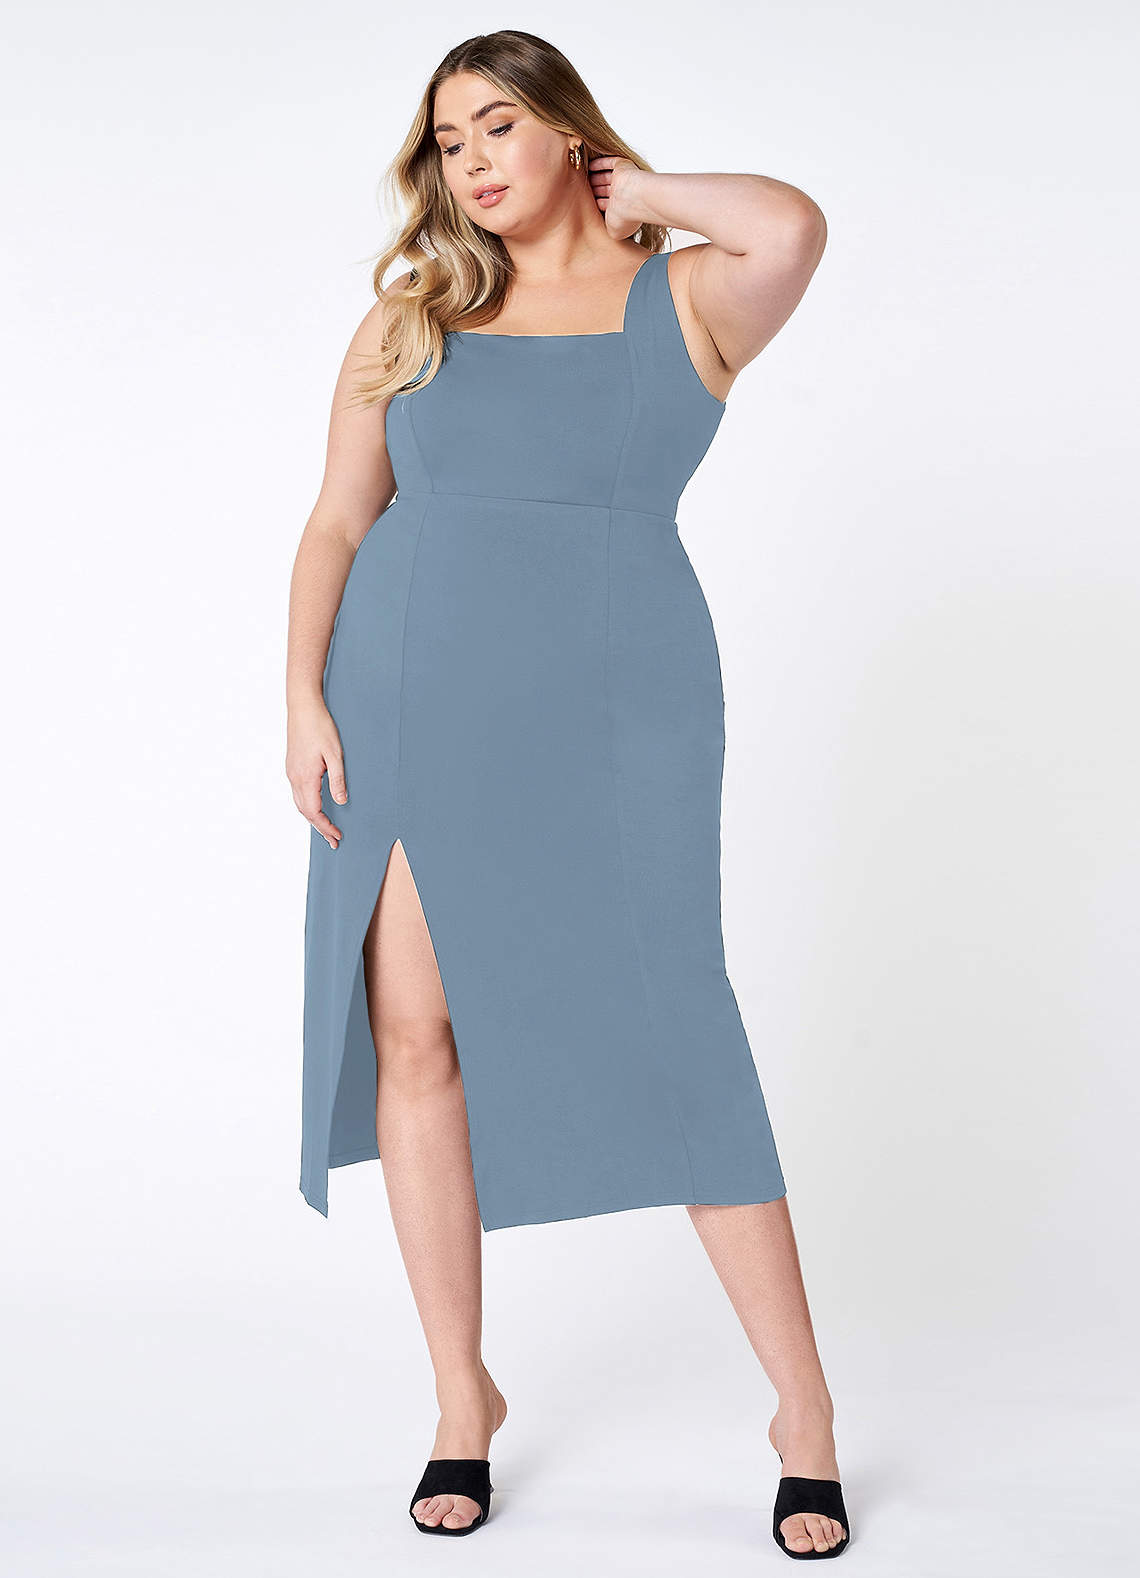 Sight To See Dusty Blue Bodycon Midi Dress image1